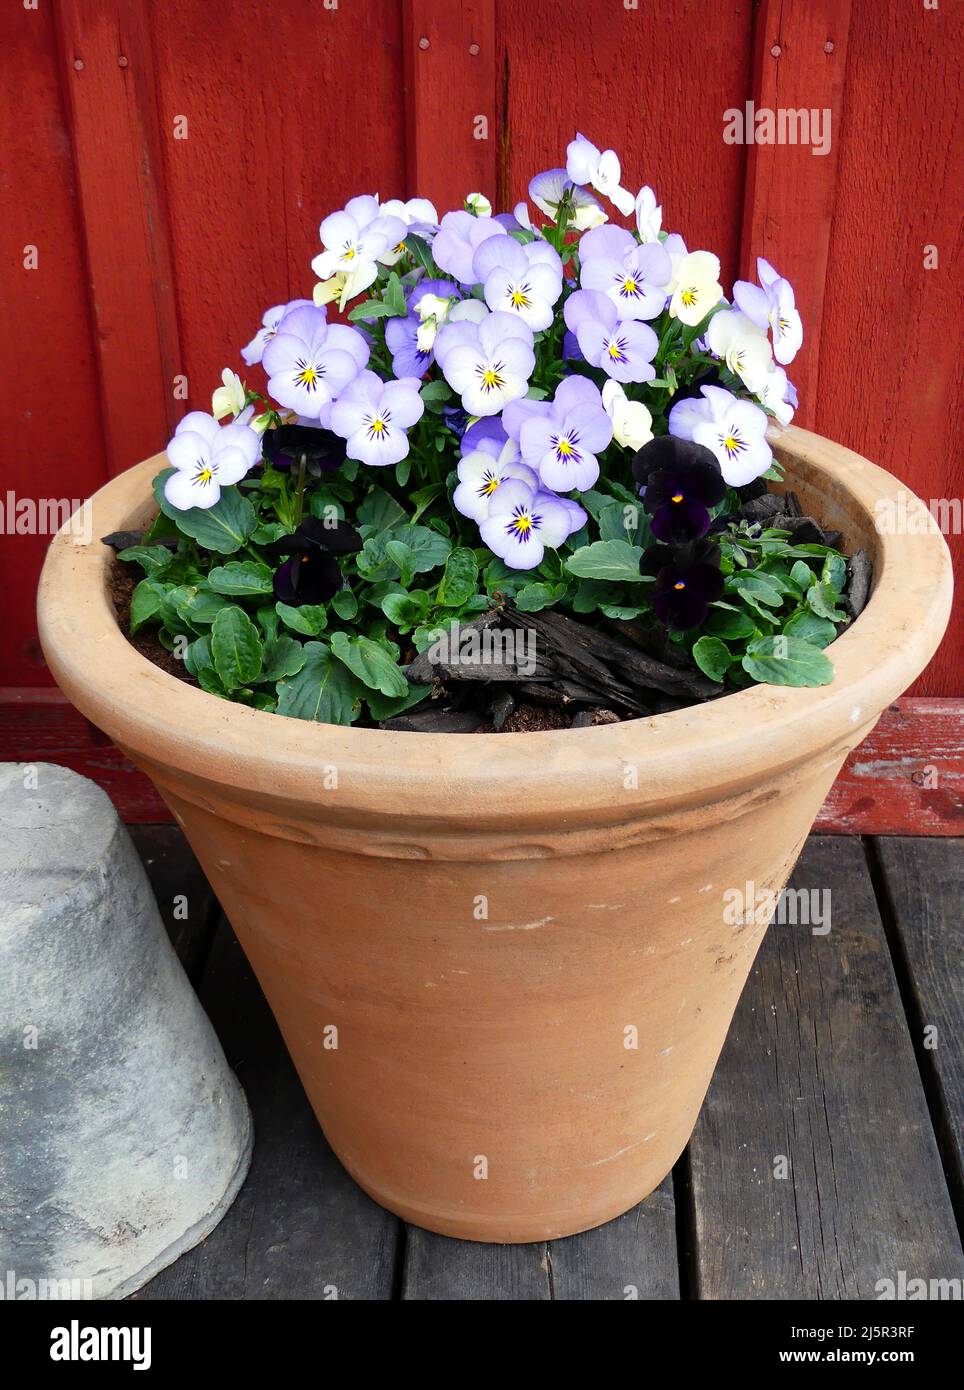 Pansies in a pot Stock Photo